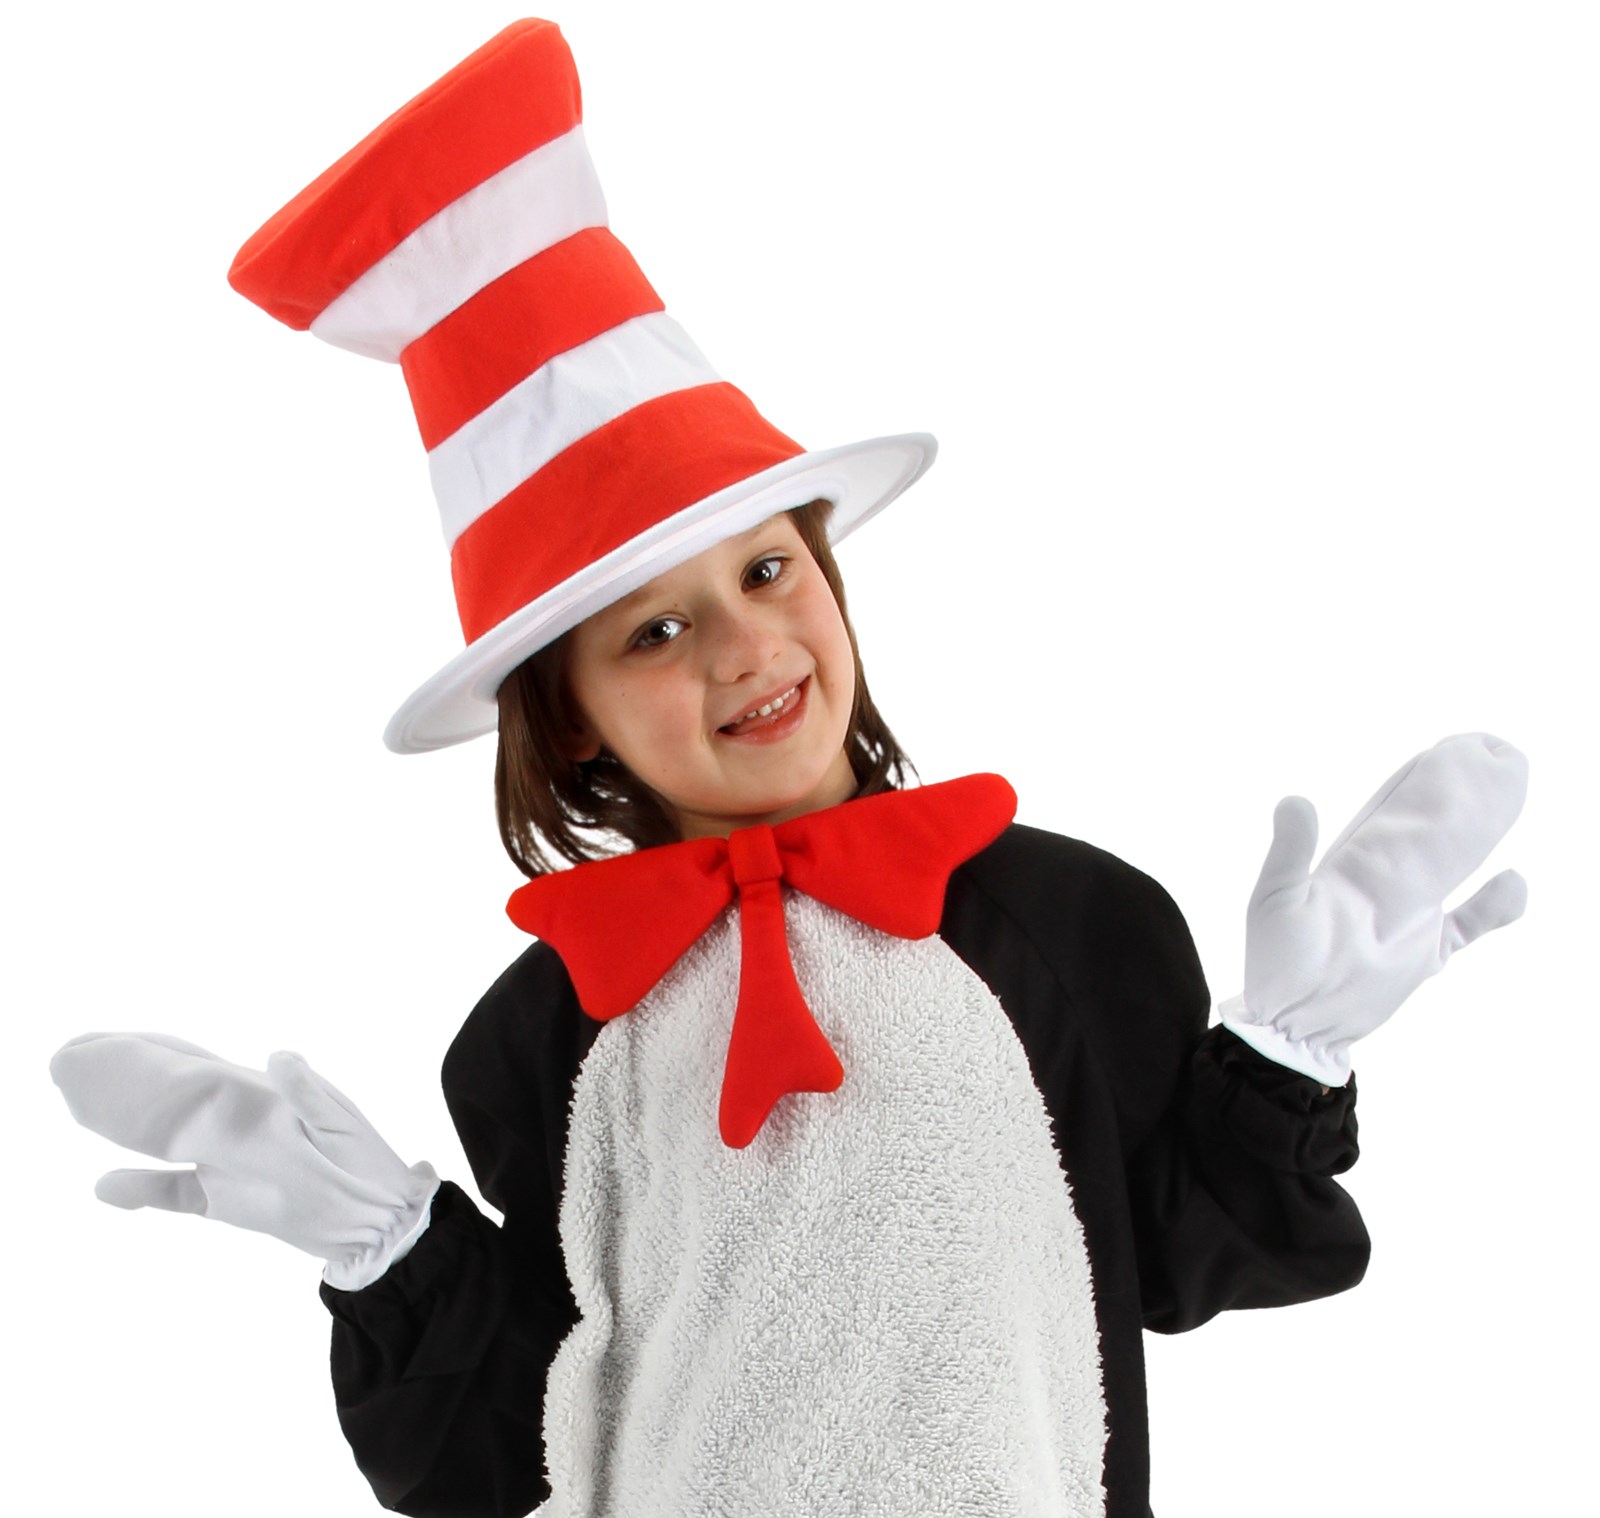 Dr. Seuss The Cat in the Hat Movie - The Cat in the Hat Mitts Child